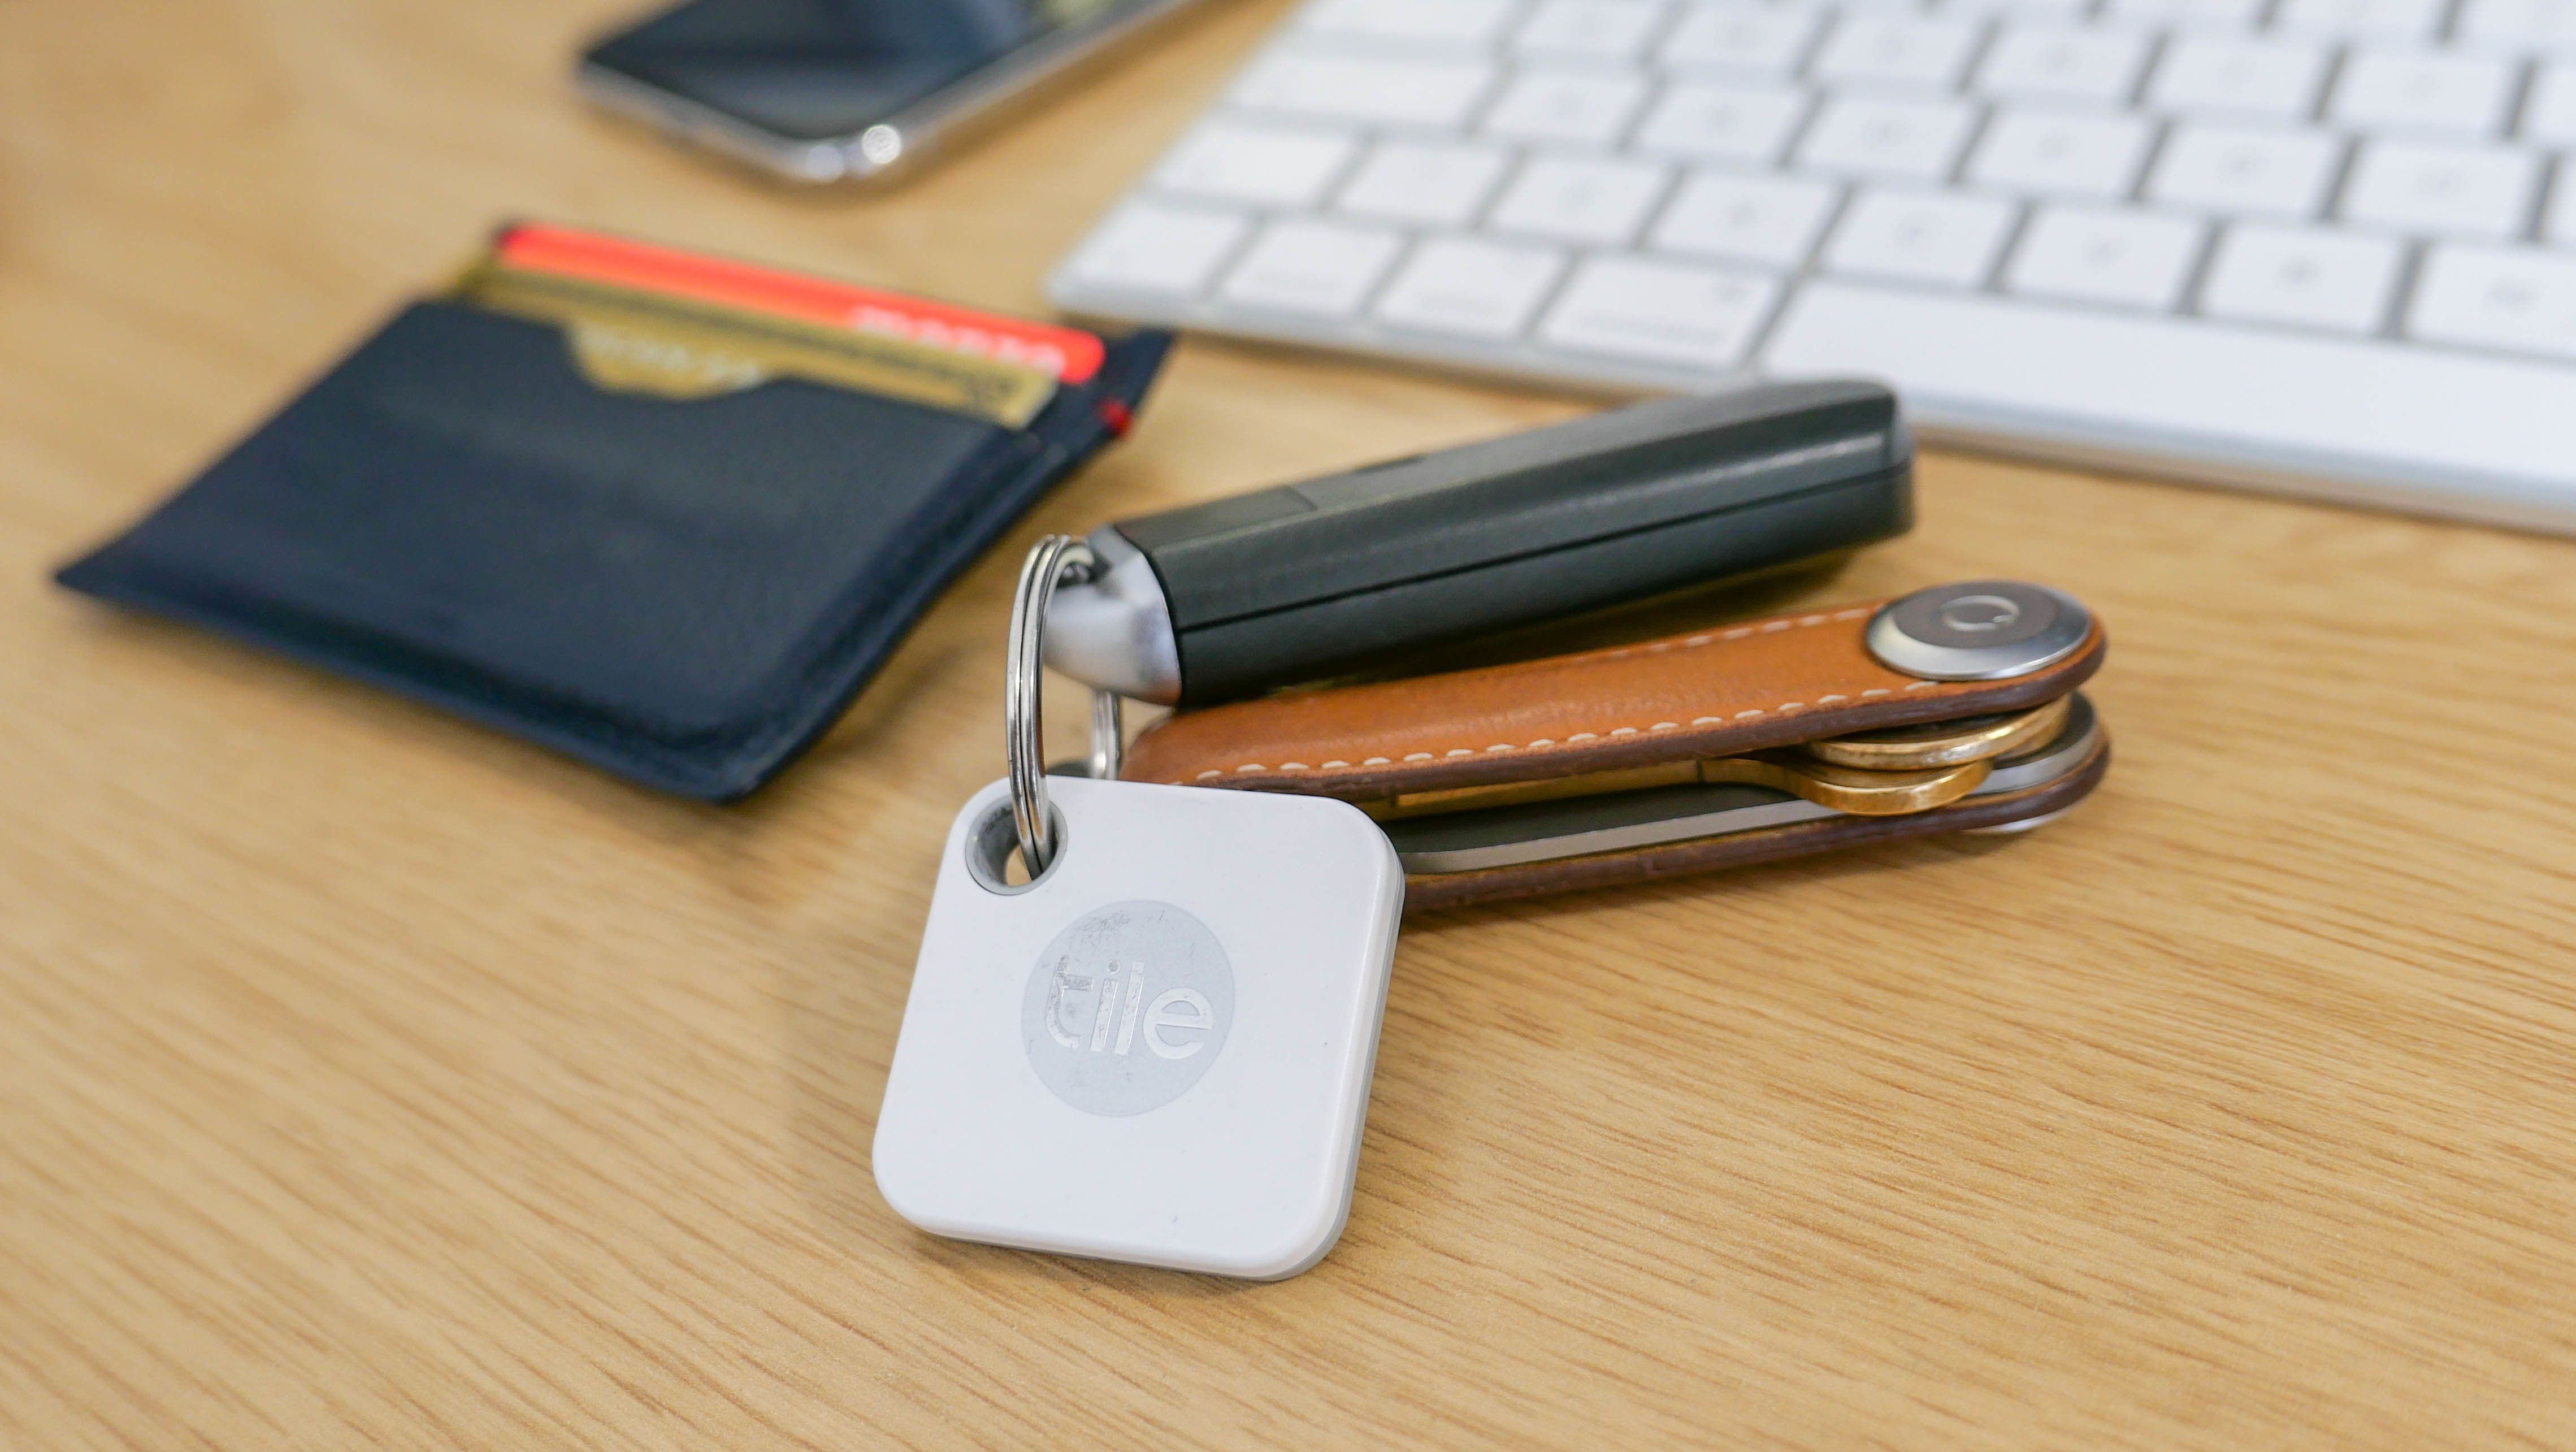 Photo of Tile Bluetooth tracker attached to keys